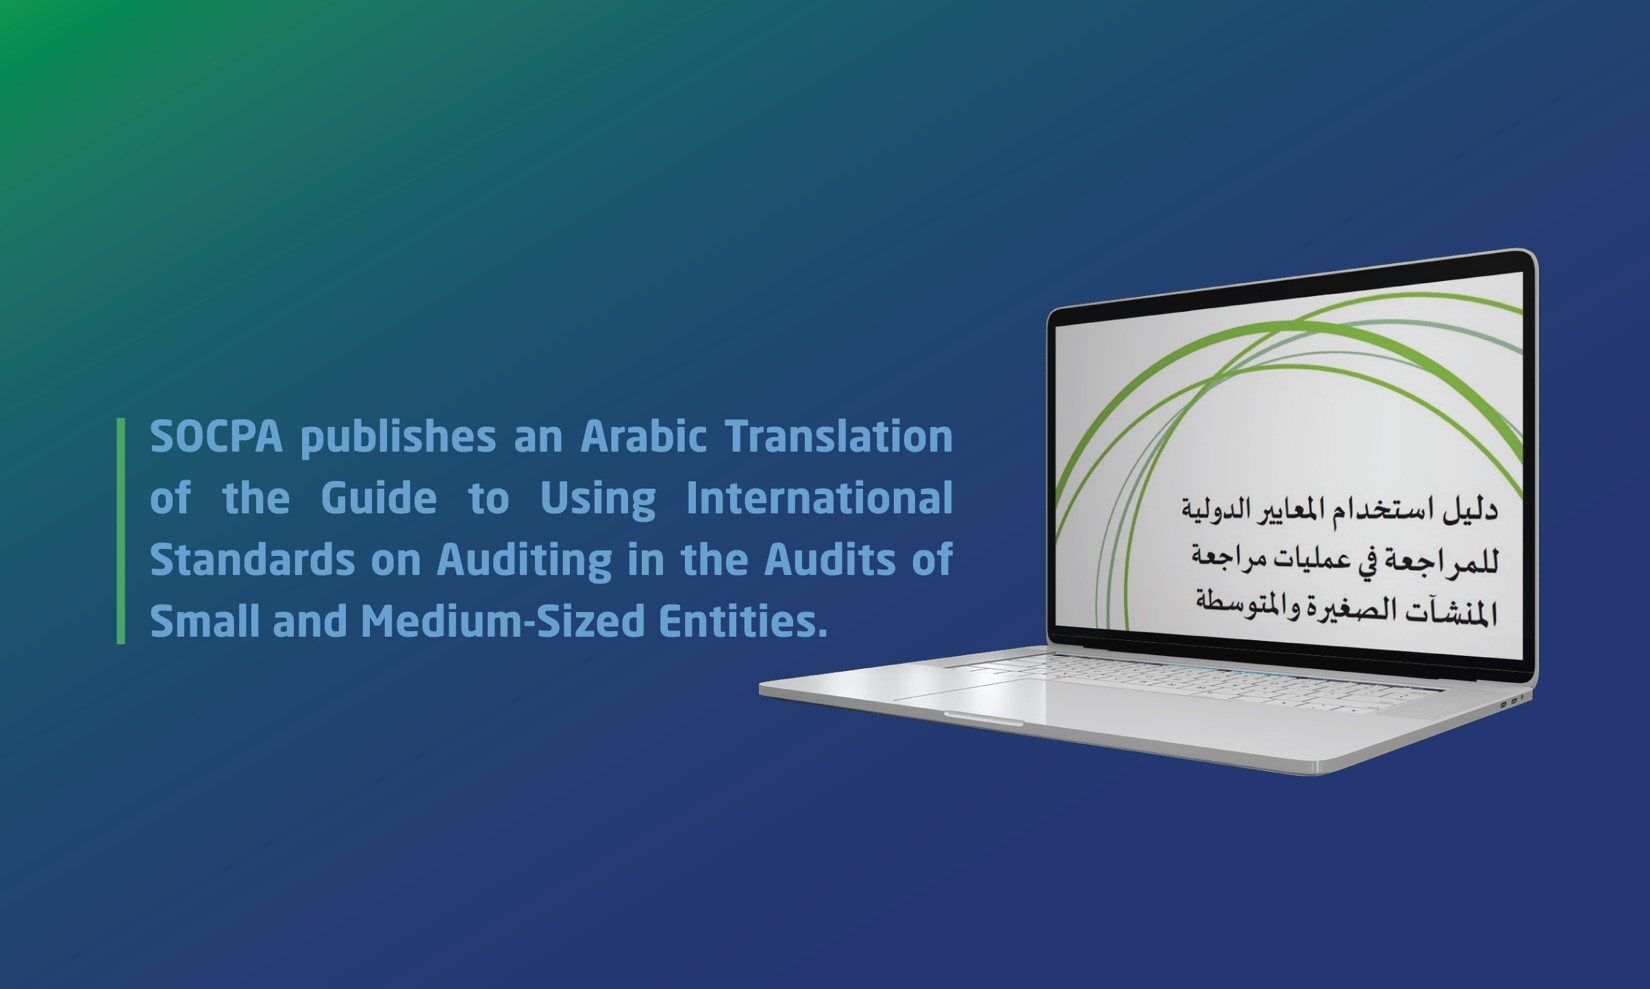 SOCPA publishes an Arabic Translation of the Guide to Using International Standards on Auditing in the Audits of Small and Medium-Sized Entities